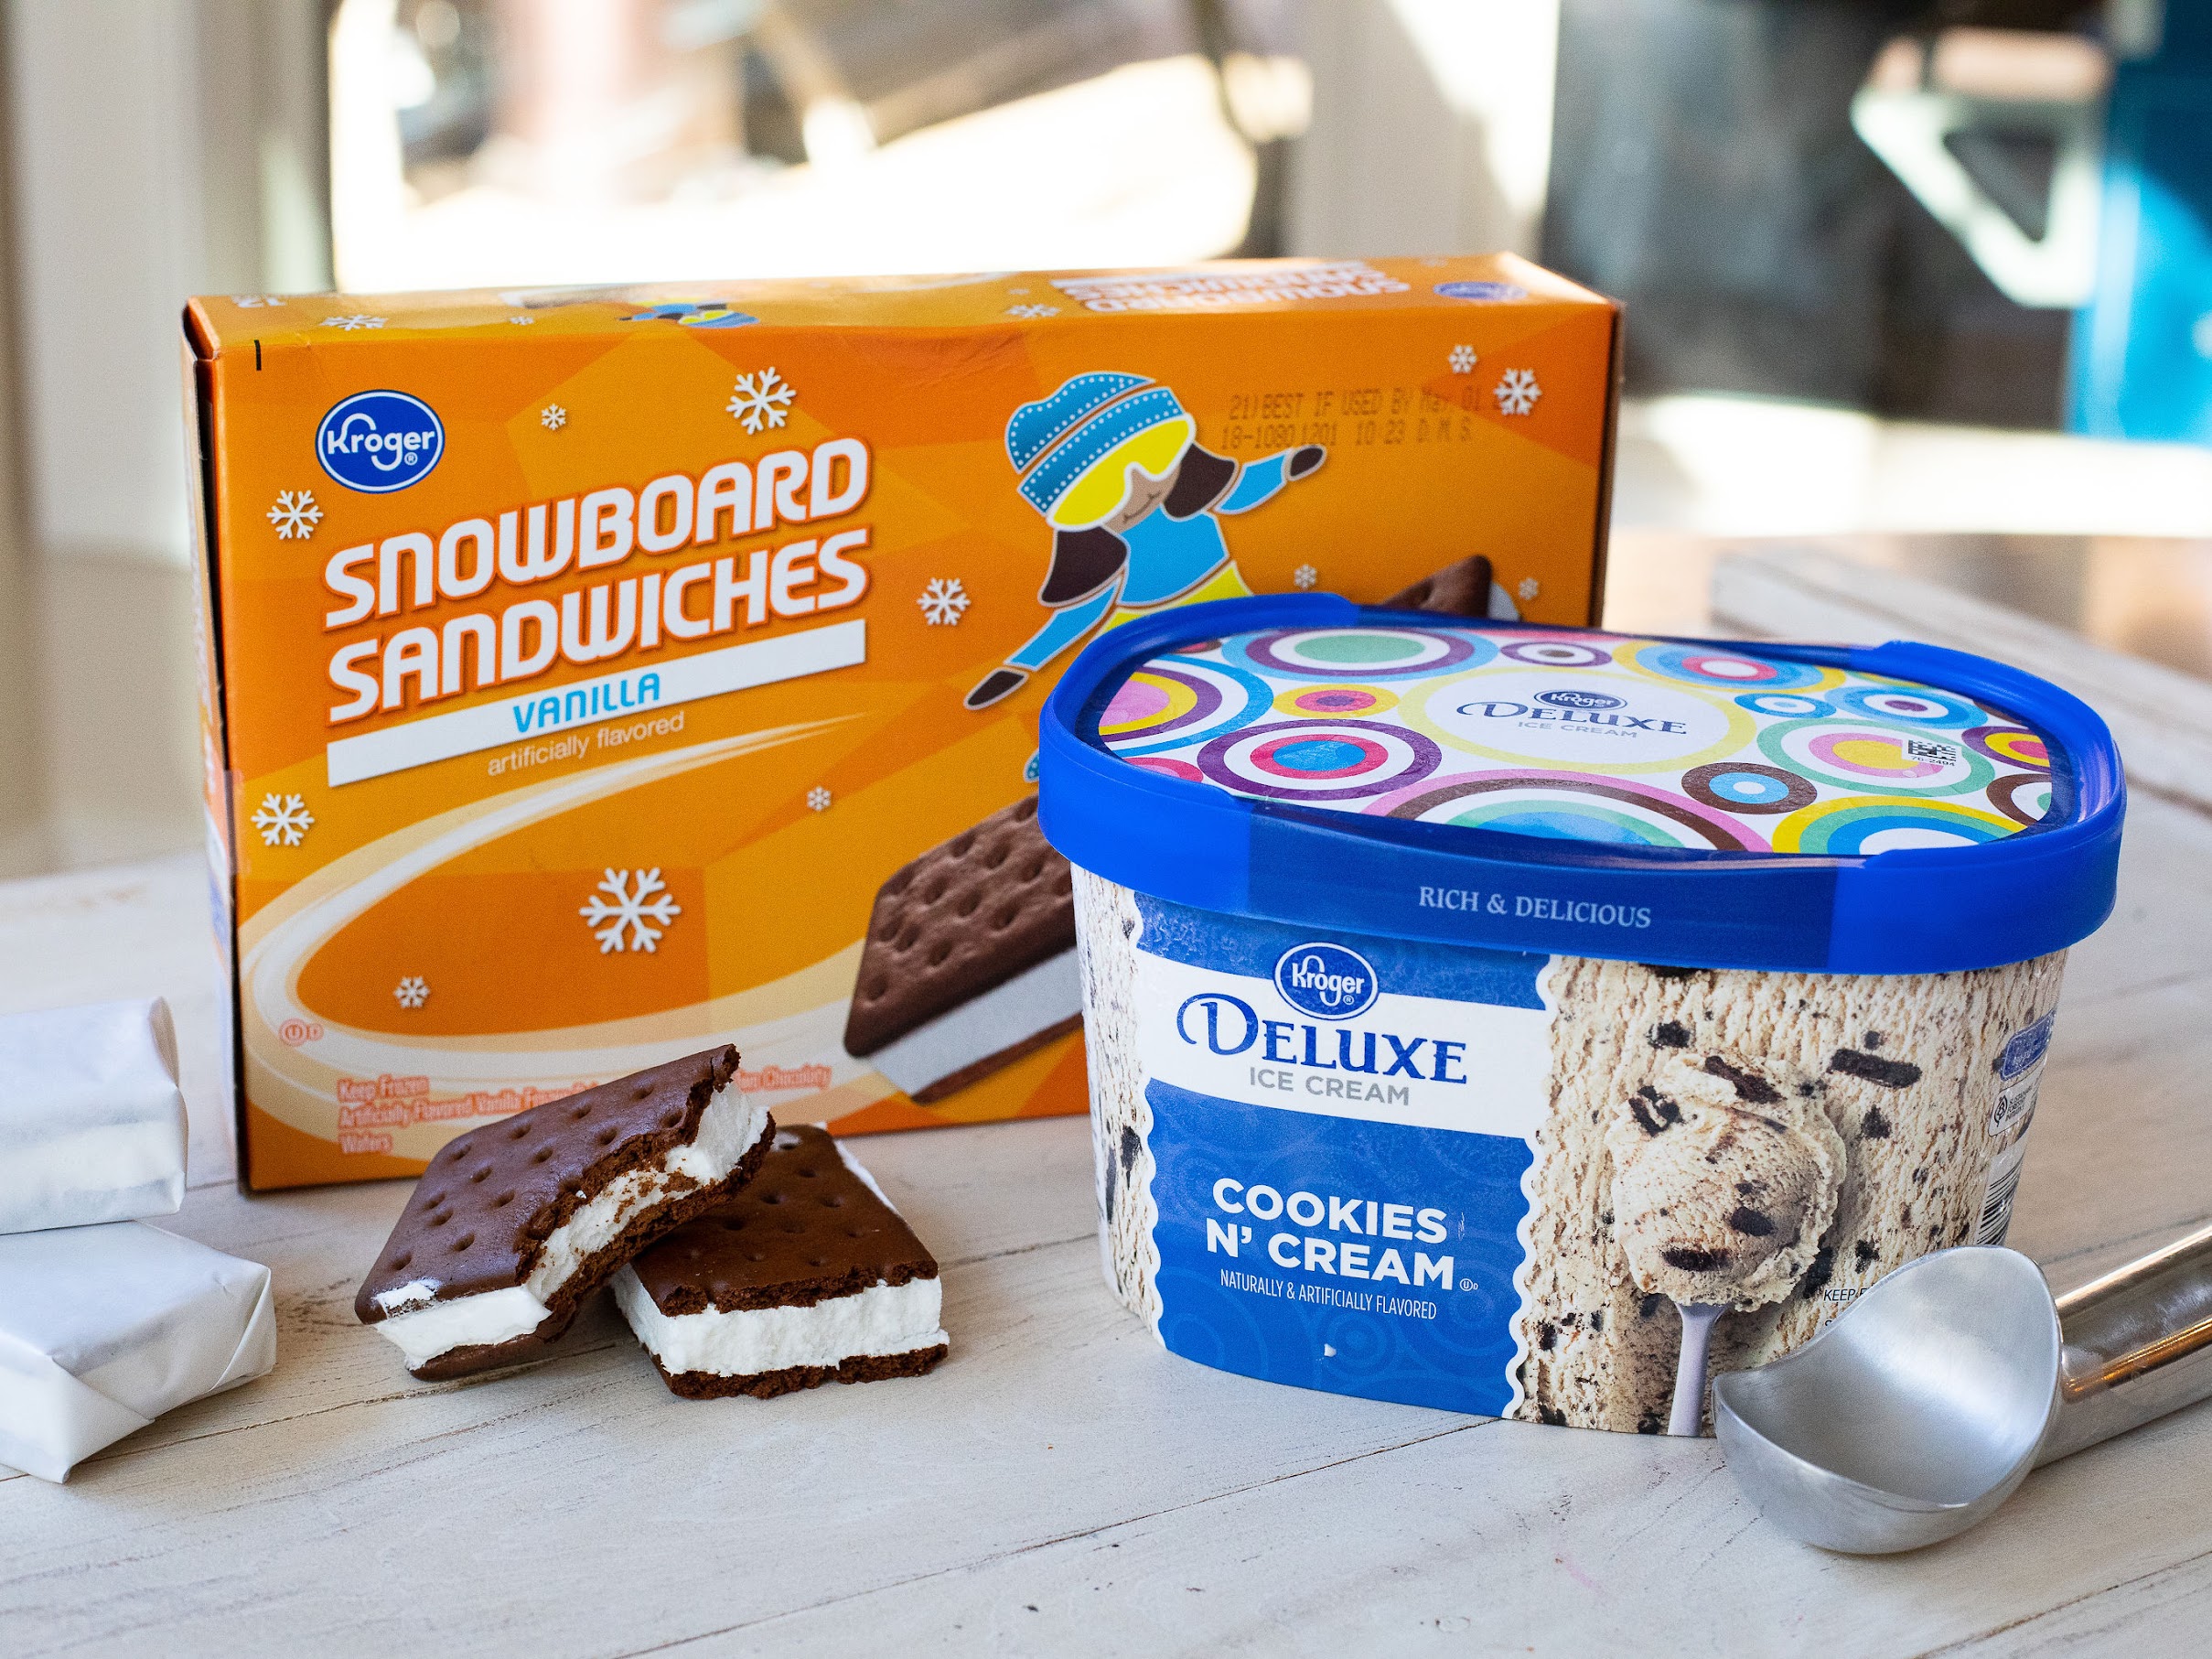 Kroger Deluxe Ice Cream Or Ice Cream Sandwiches Just $1.99 At Kroger